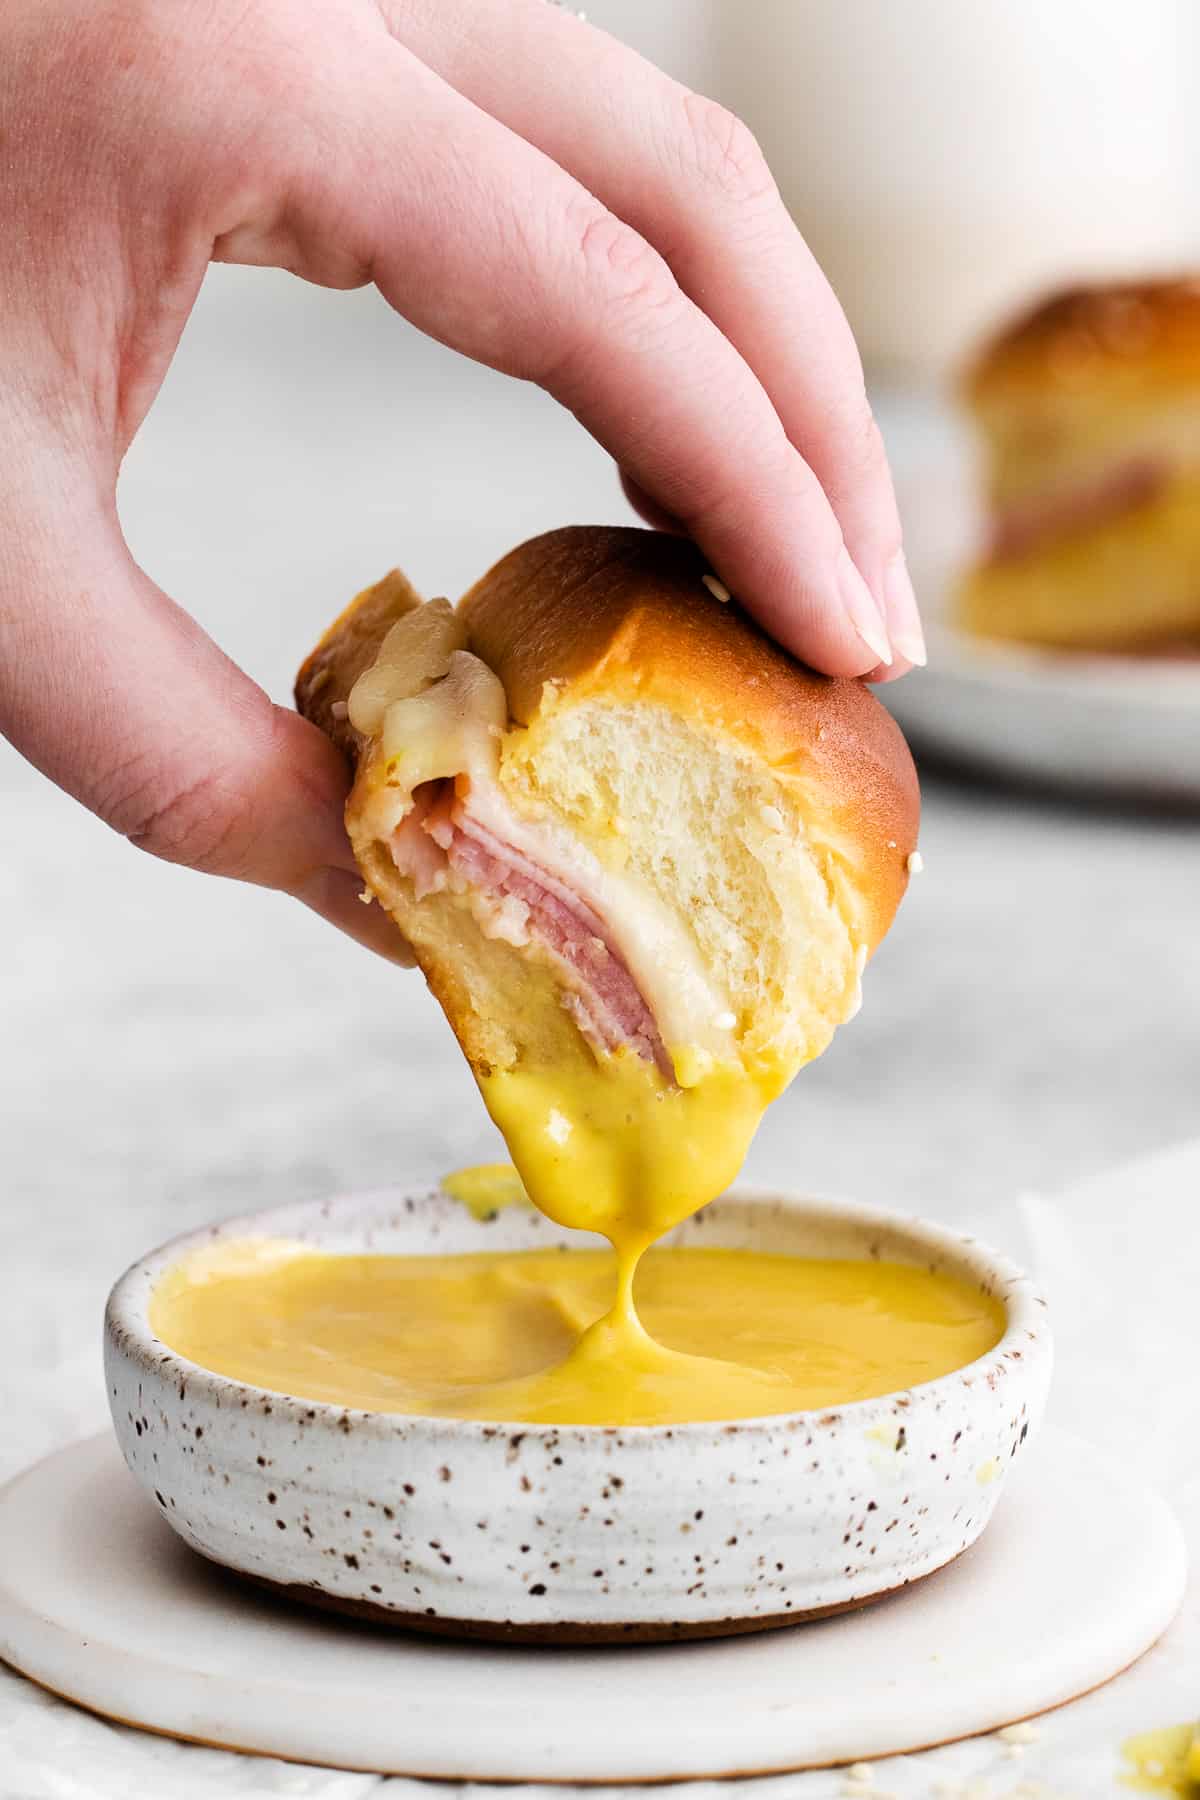 A ham and cheese slider being dipped into honey mustard sauce.